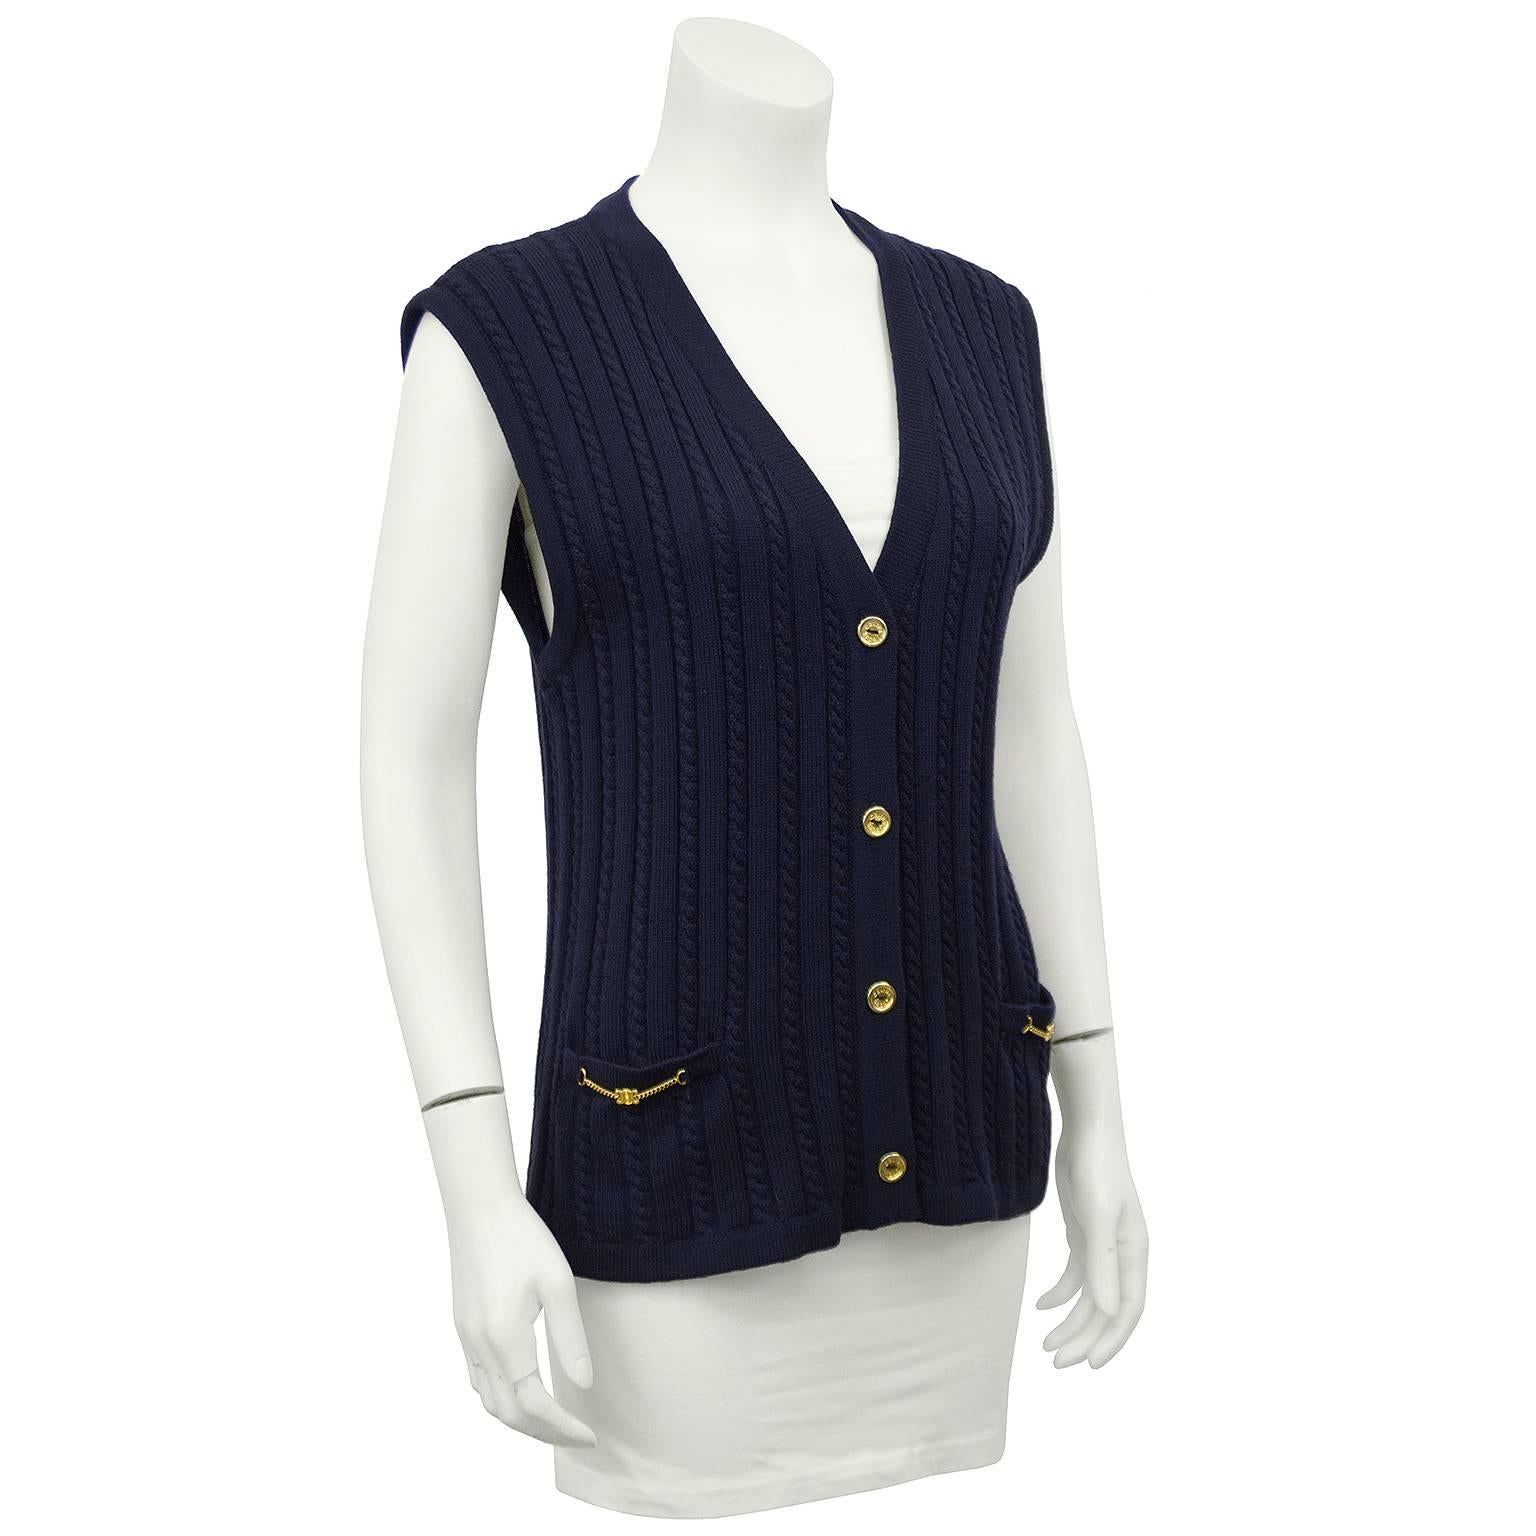 Céline Sport cable knit navy blue vest dating from the early 1970s. Small gold buttons down centre and the iconic Céline gold chain logo details on patch pockets. Excellent vintage condition. Fits like a US 4/6. 

Bust 35” Waist 33” Hips 37” Length